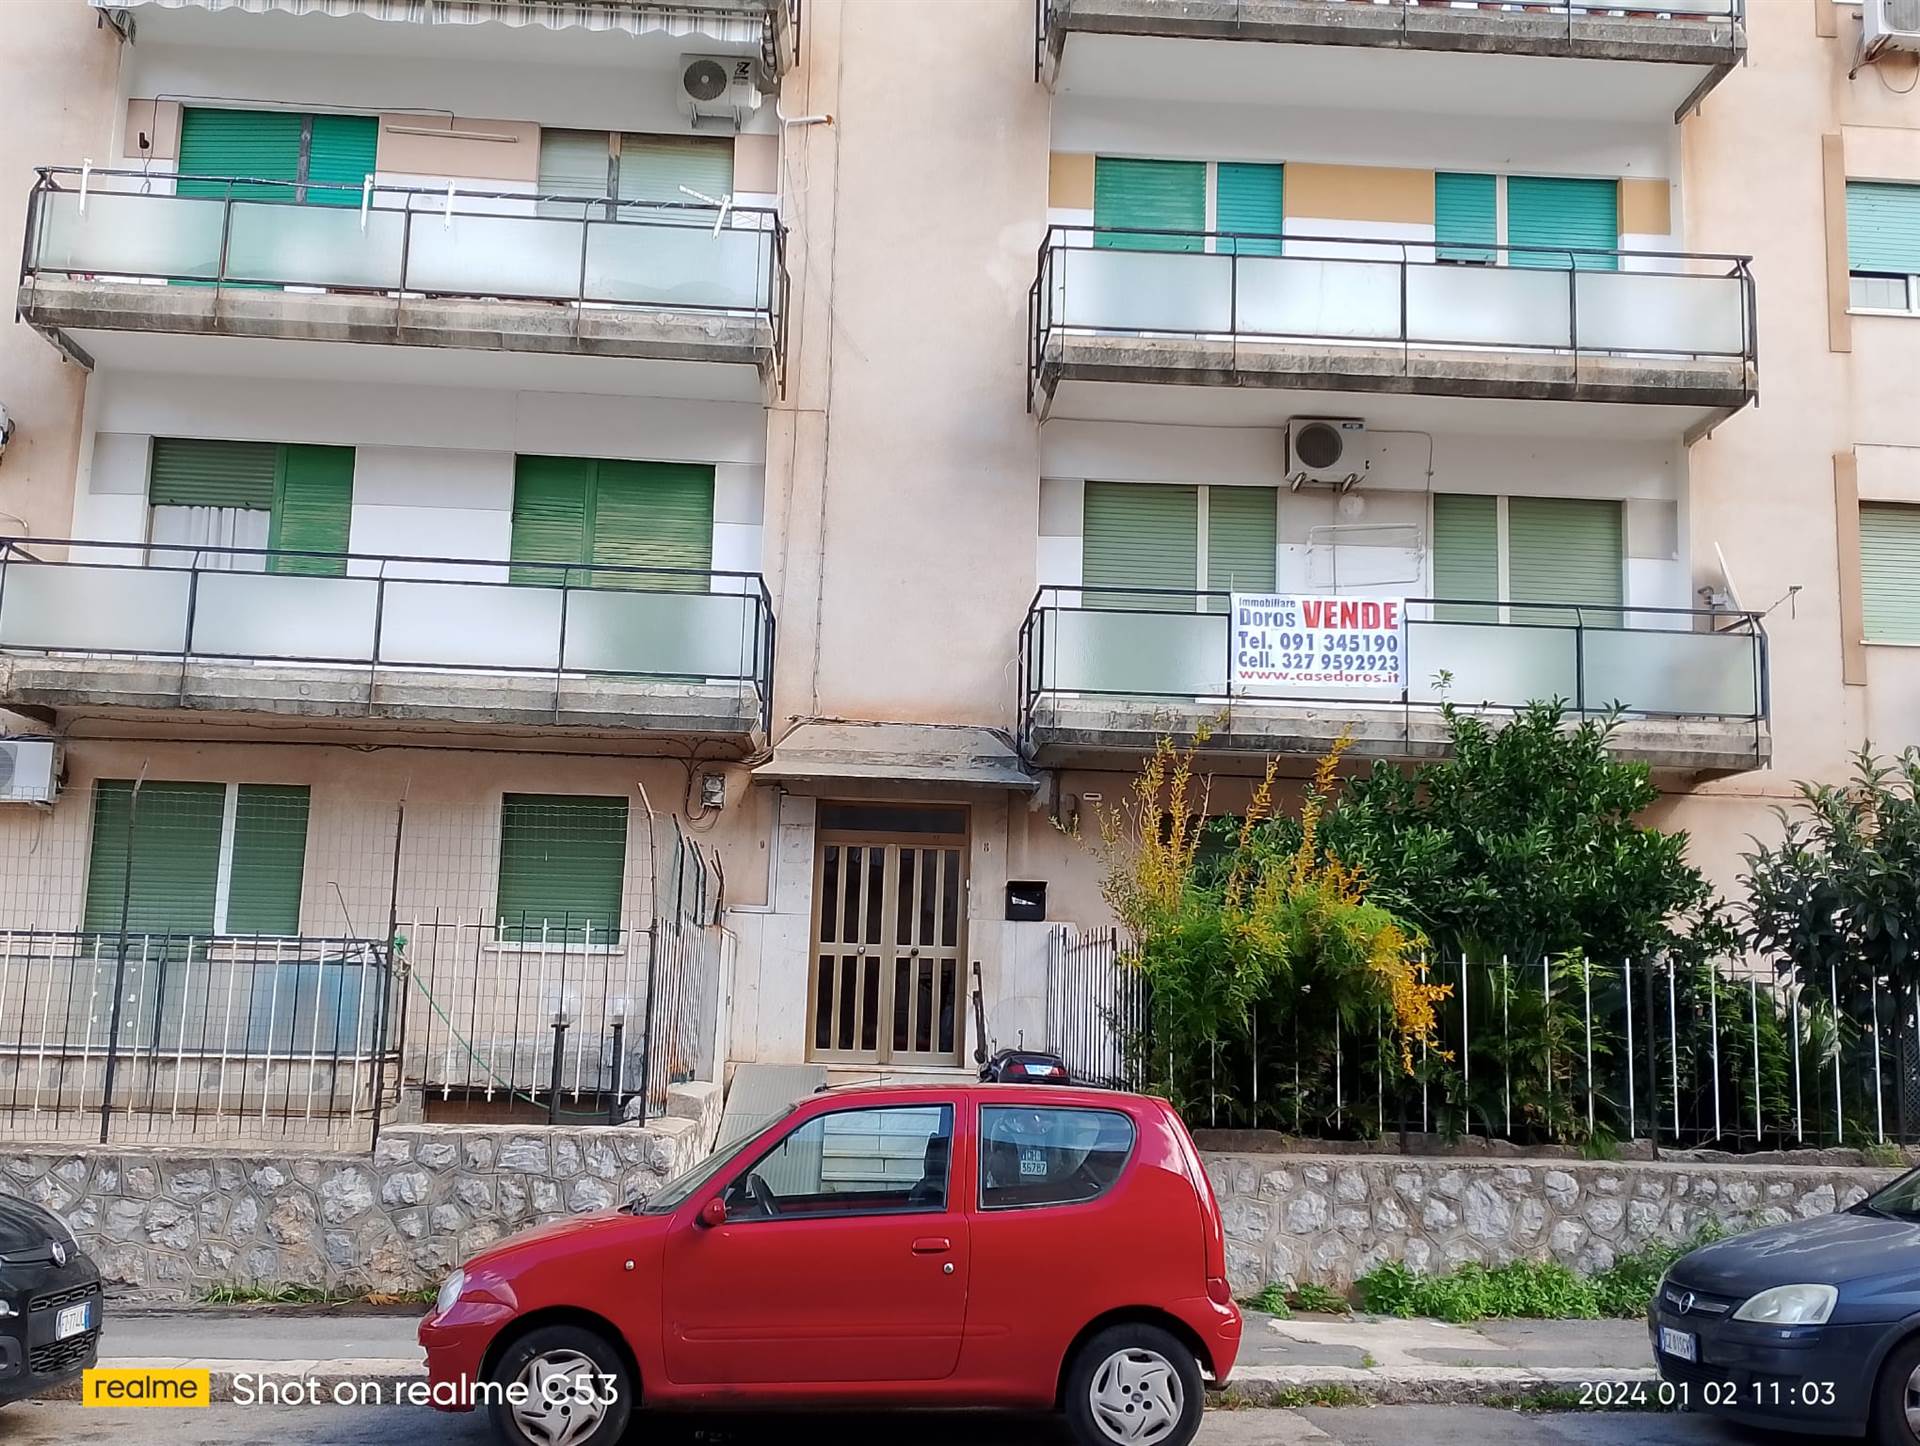 BONAGIA, PALERMO, Apartment for sale of 120 Sq. mt., Good condition, Heating Non-existent, Energetic class: G, Epi: 175 kwh/m2 year, placed at 1° on 